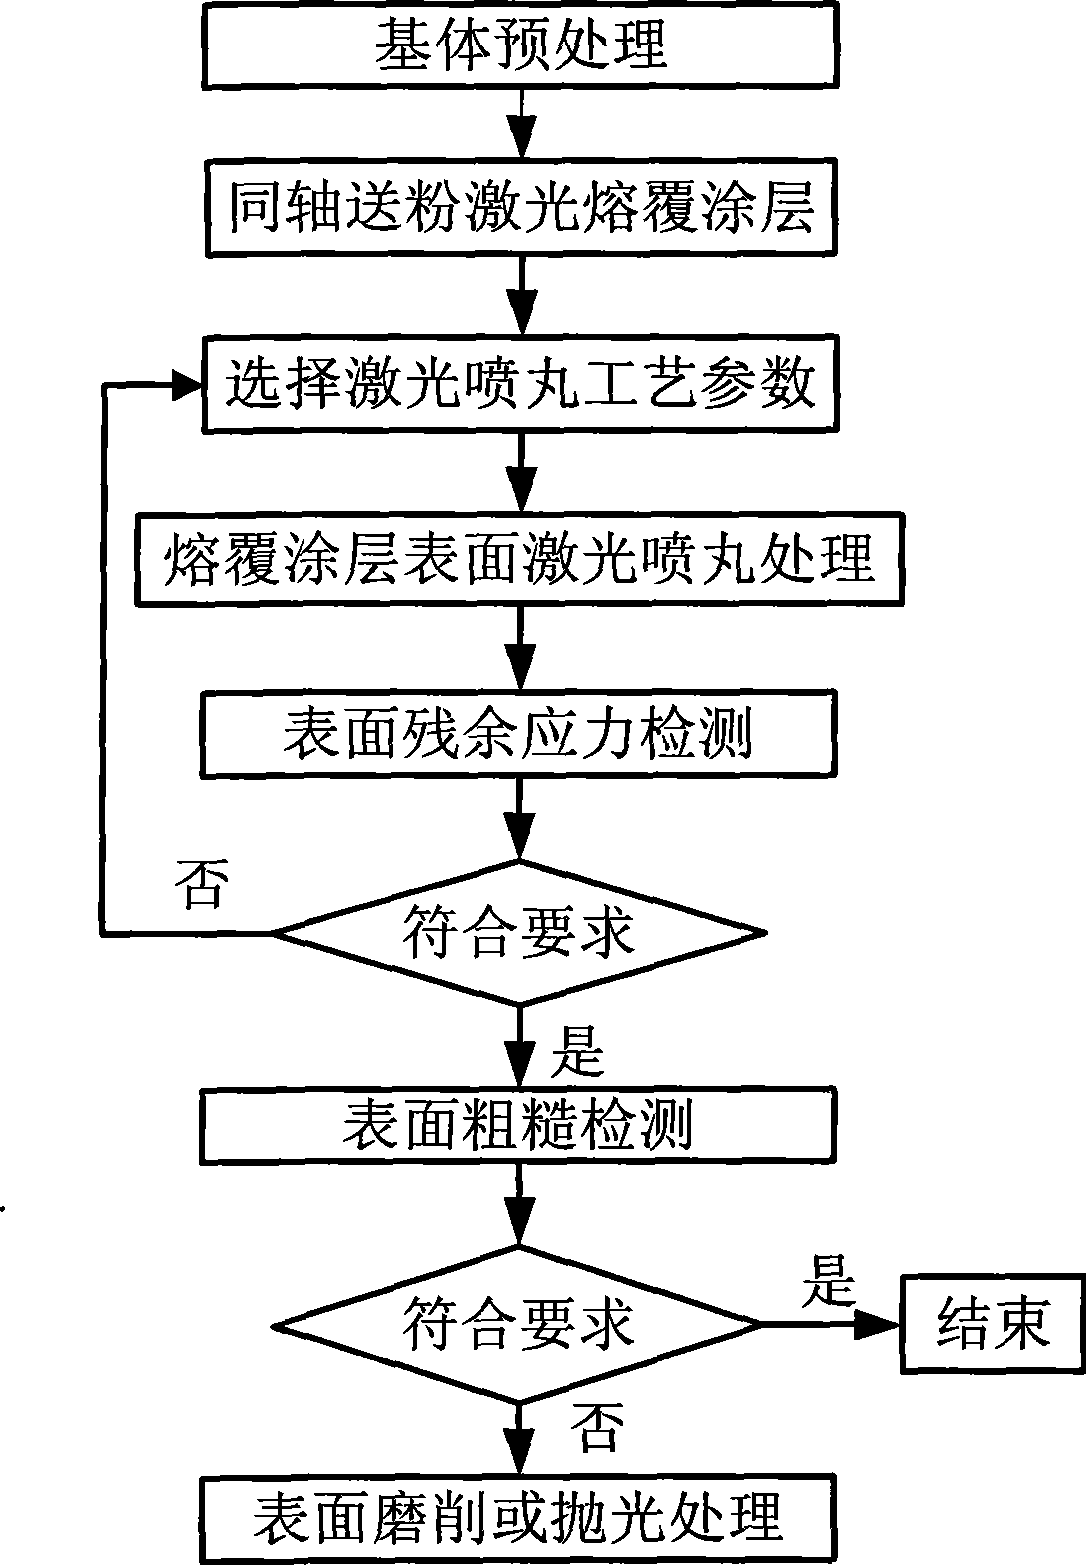 Method and device for strengthening surface modification by combination of laser cladding and laser peening